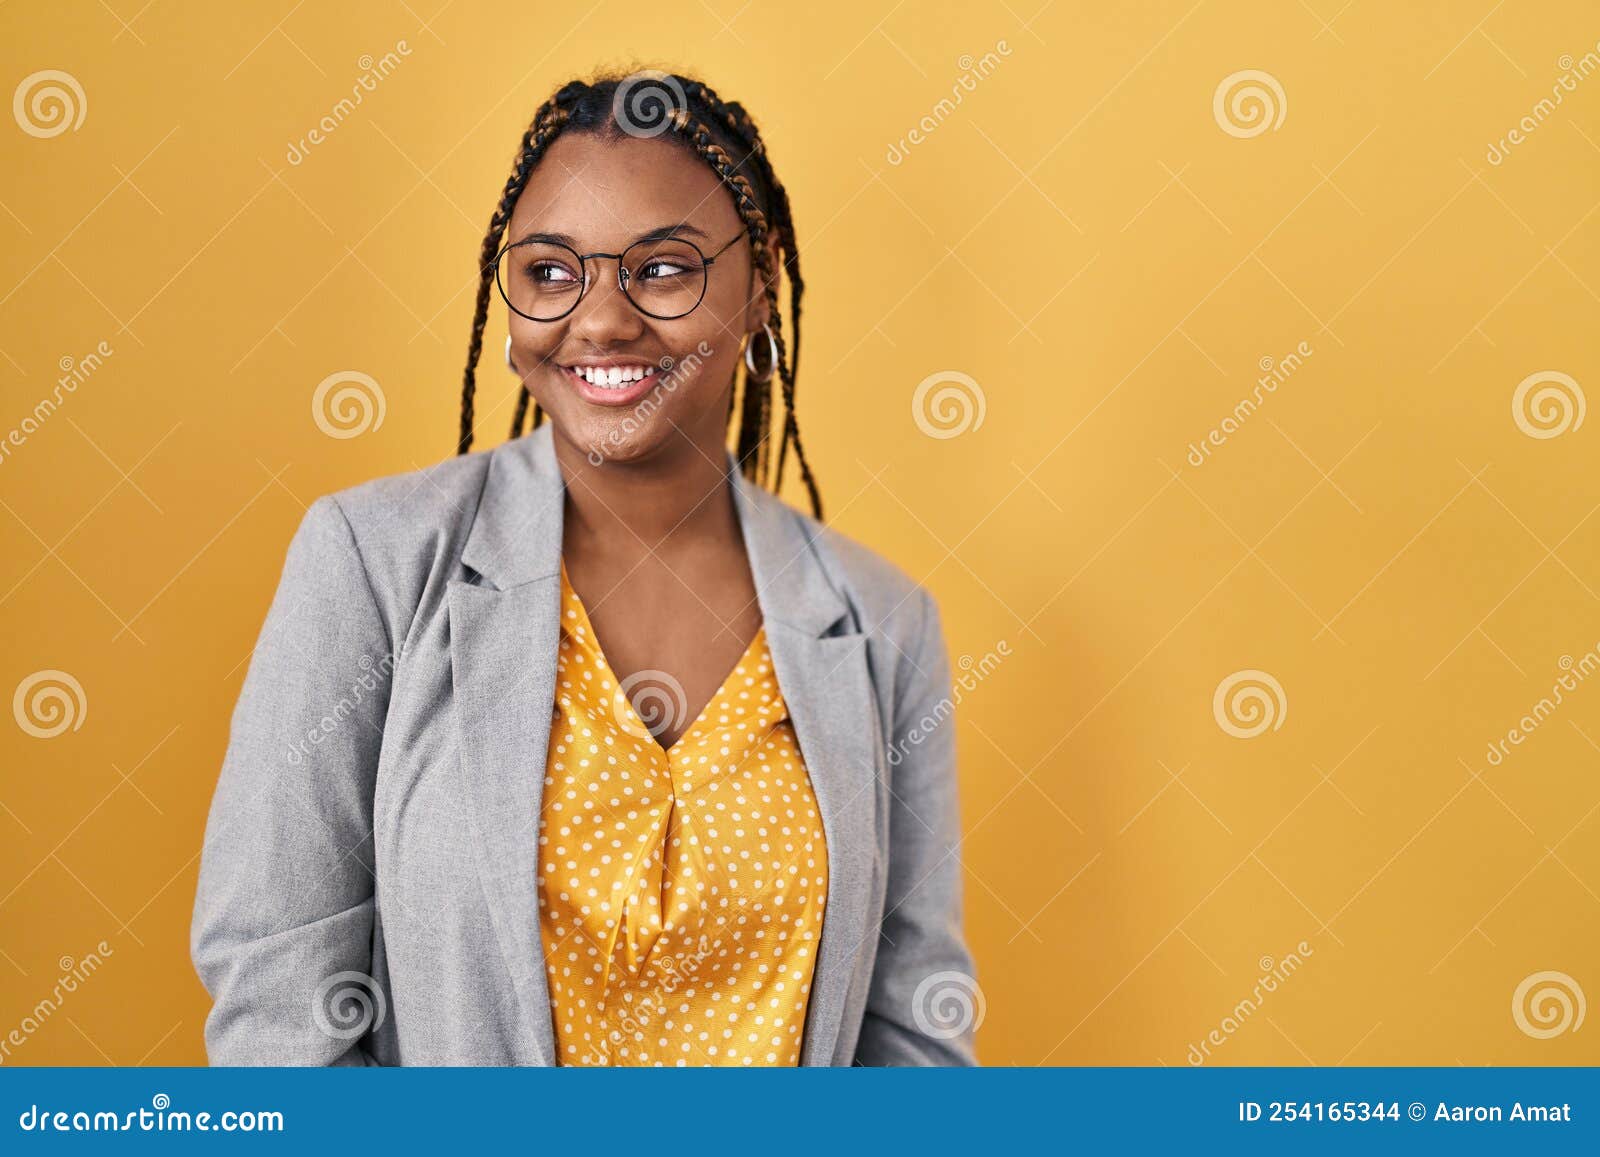 African american woman with braids standing over yellow background looking away to side with smile on face, natural expression. laughing confident